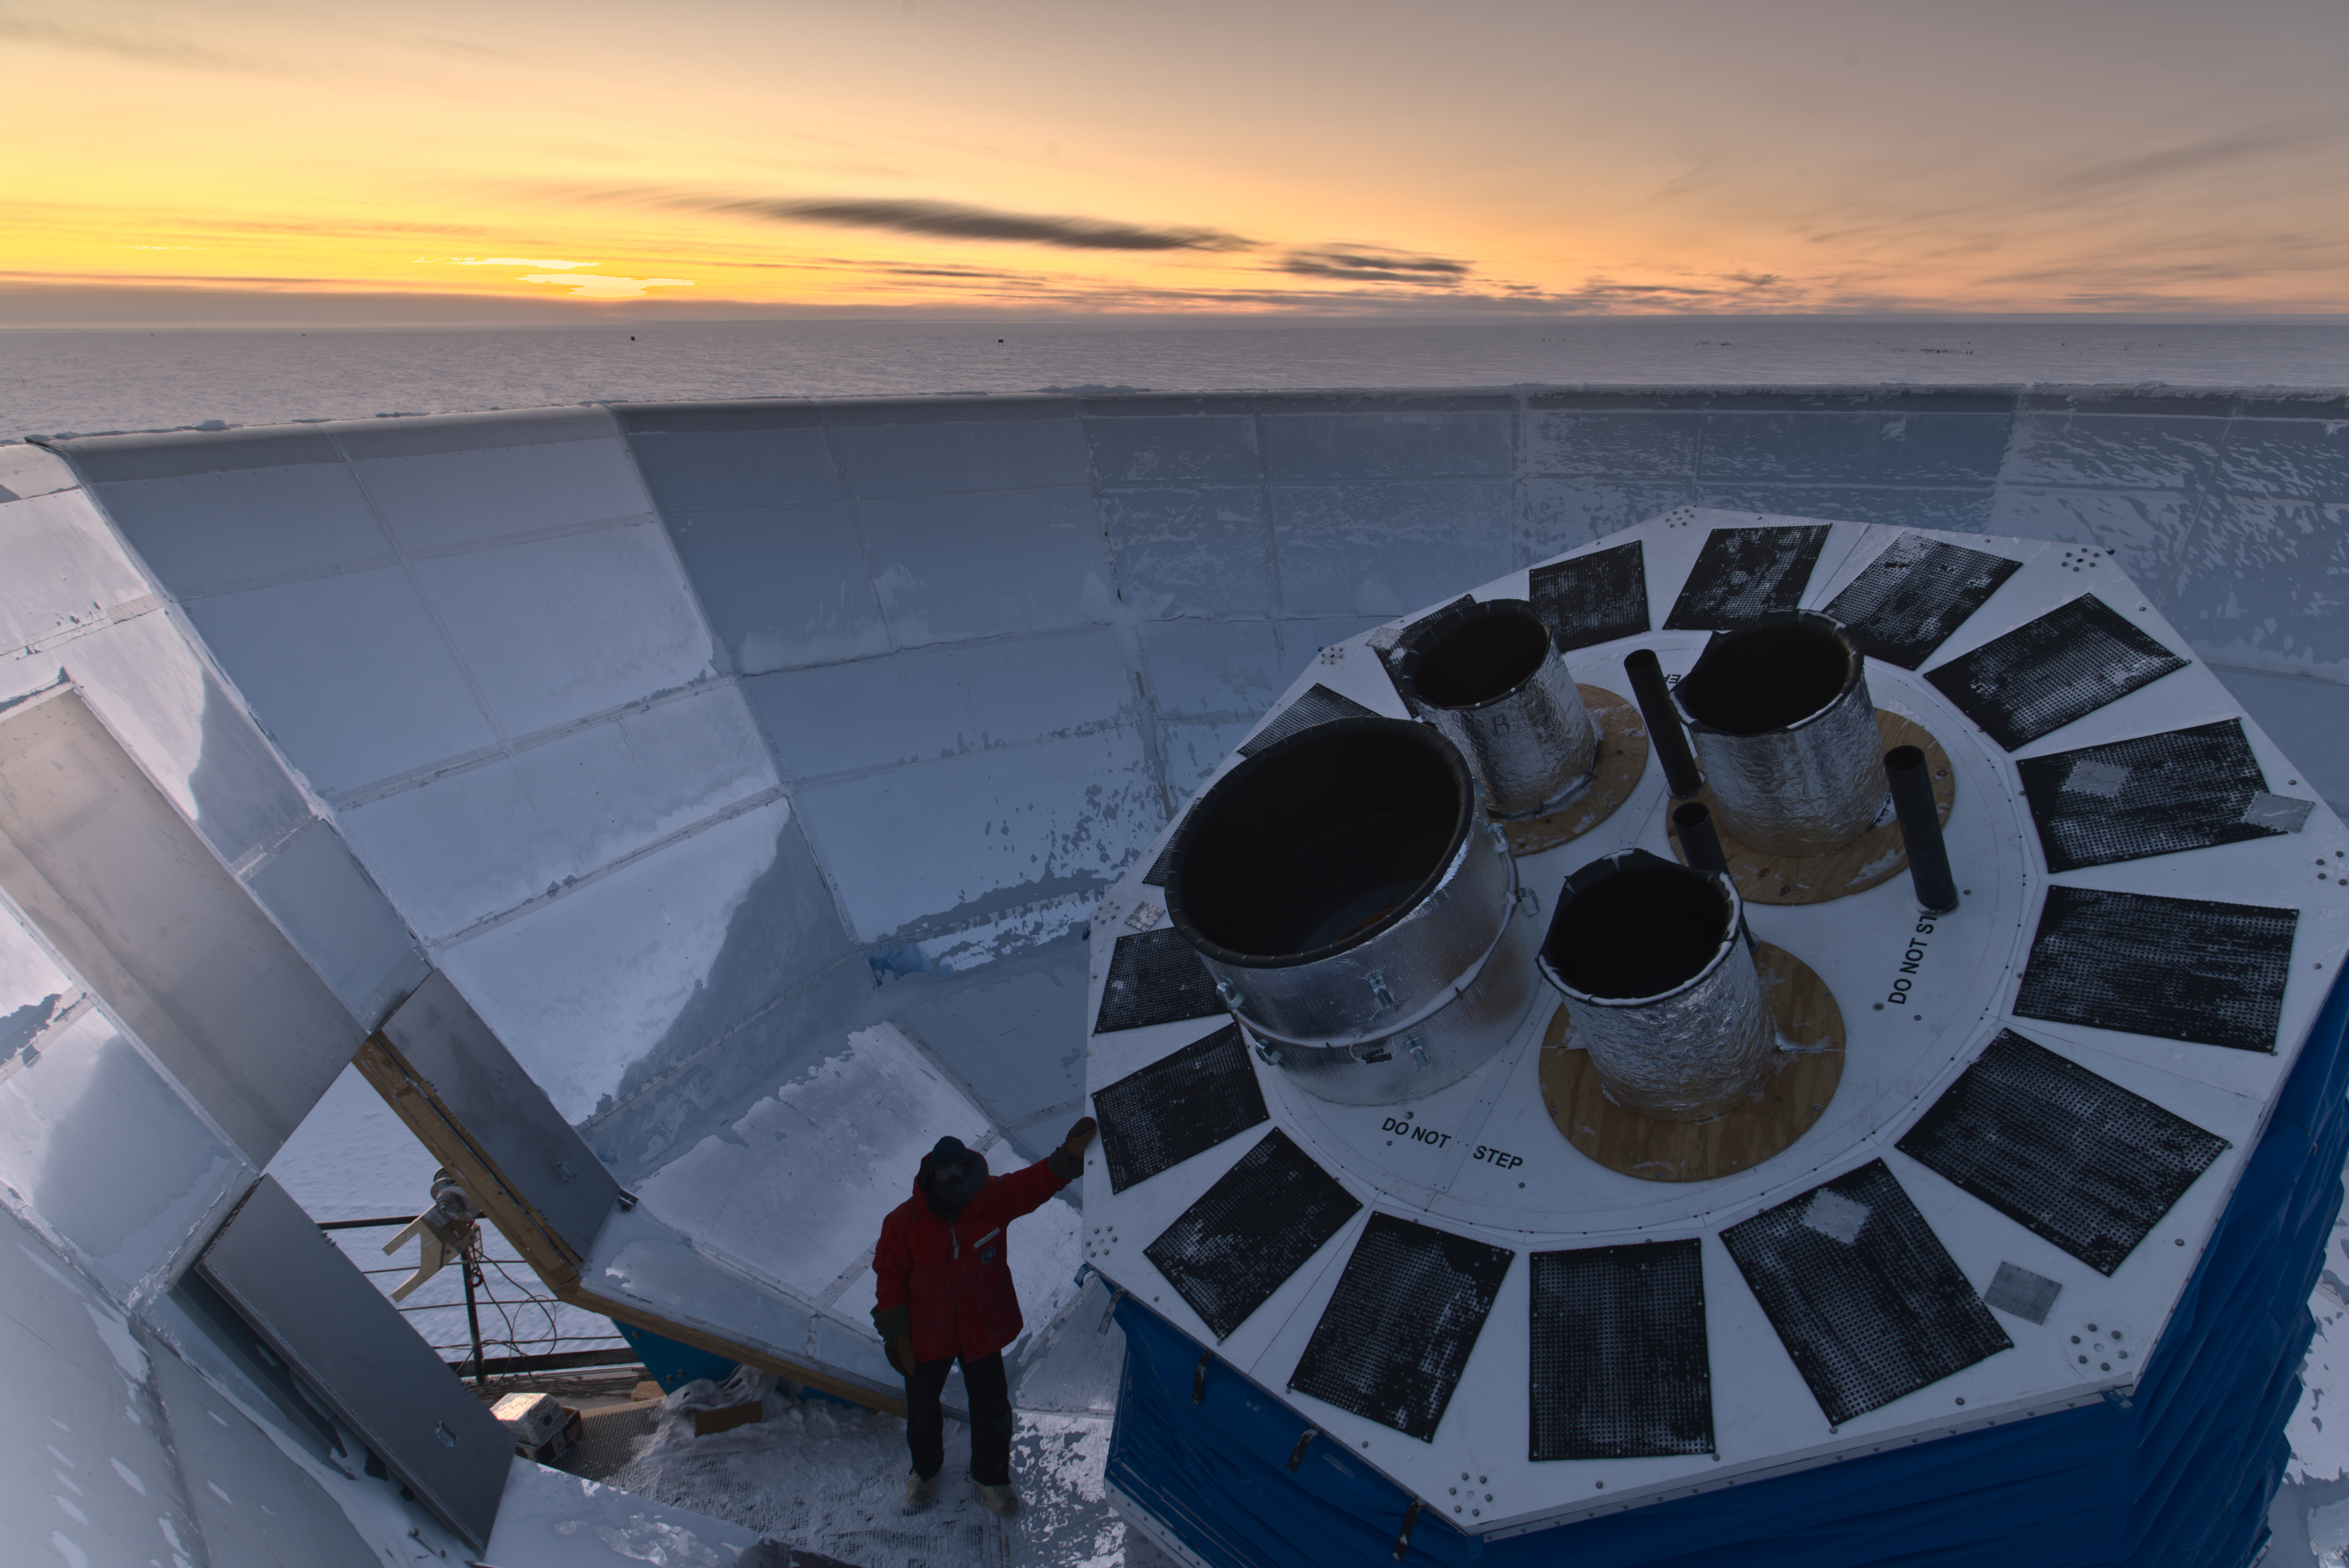 Four cylinders emerge from a circular structure inside a large dish, with a snowy landscape behind. 